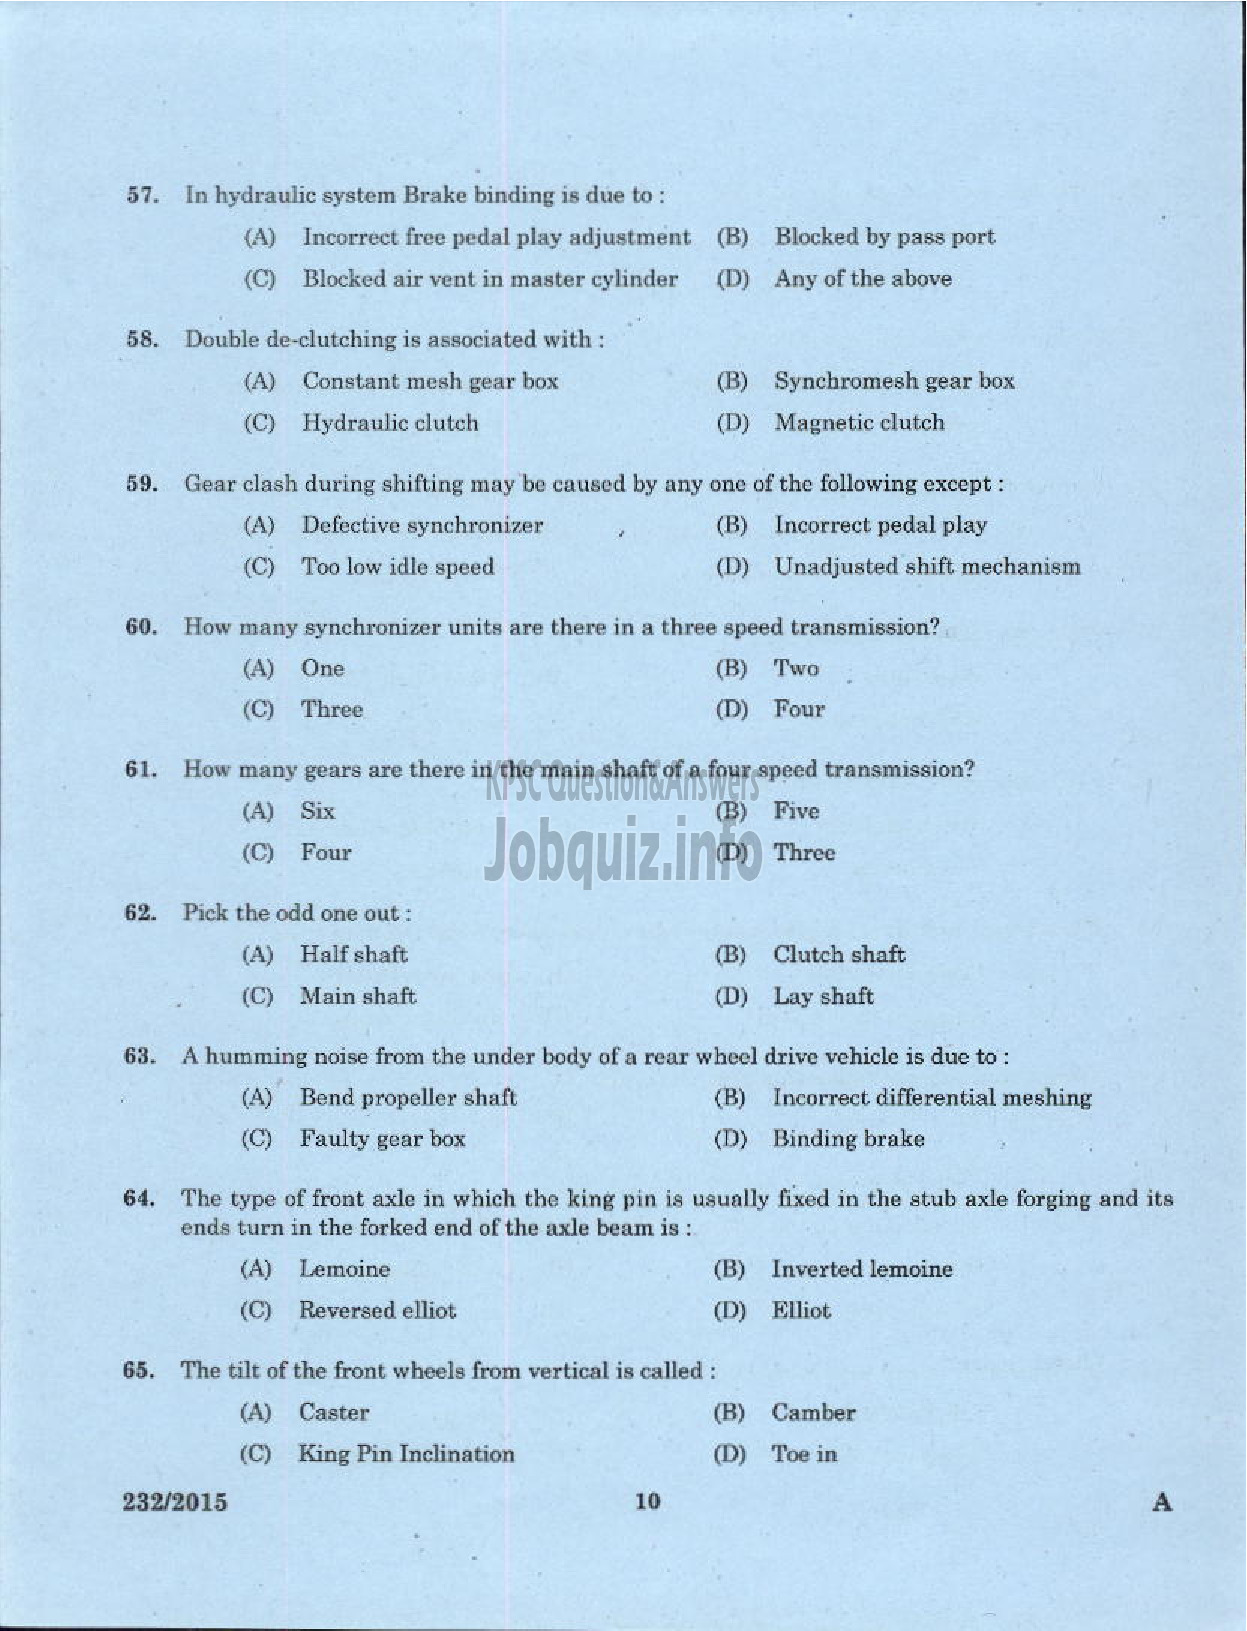 Kerala PSC Question Paper - MOTOR MECHANIC/STORE ASSISTANT GROUND WATER-8